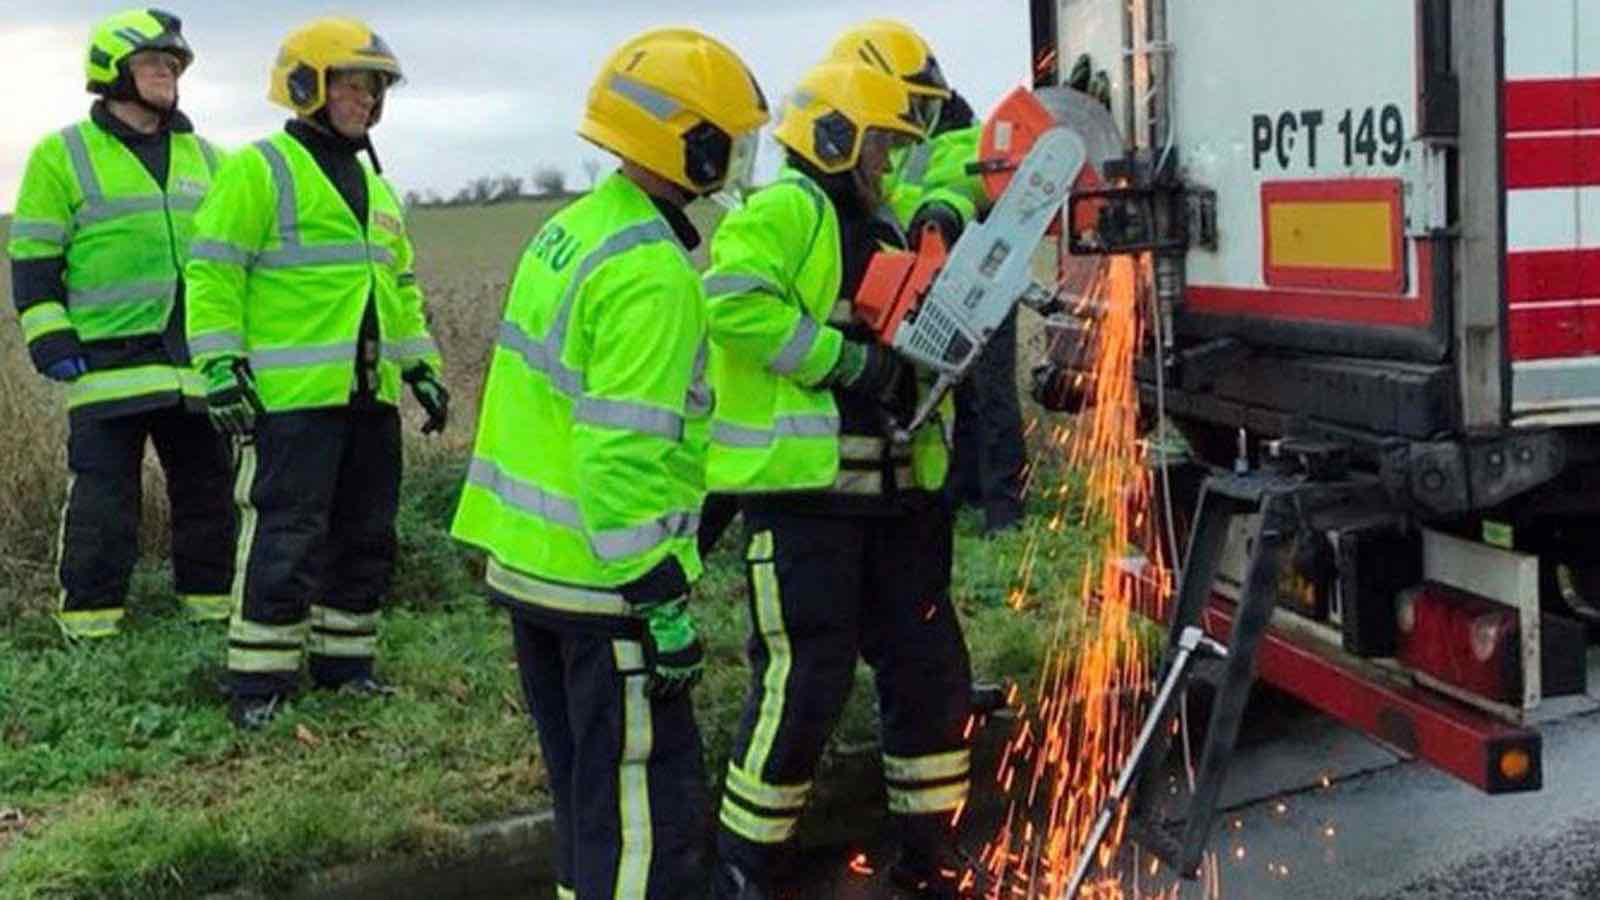 11 people found in lorry freed by firefighters